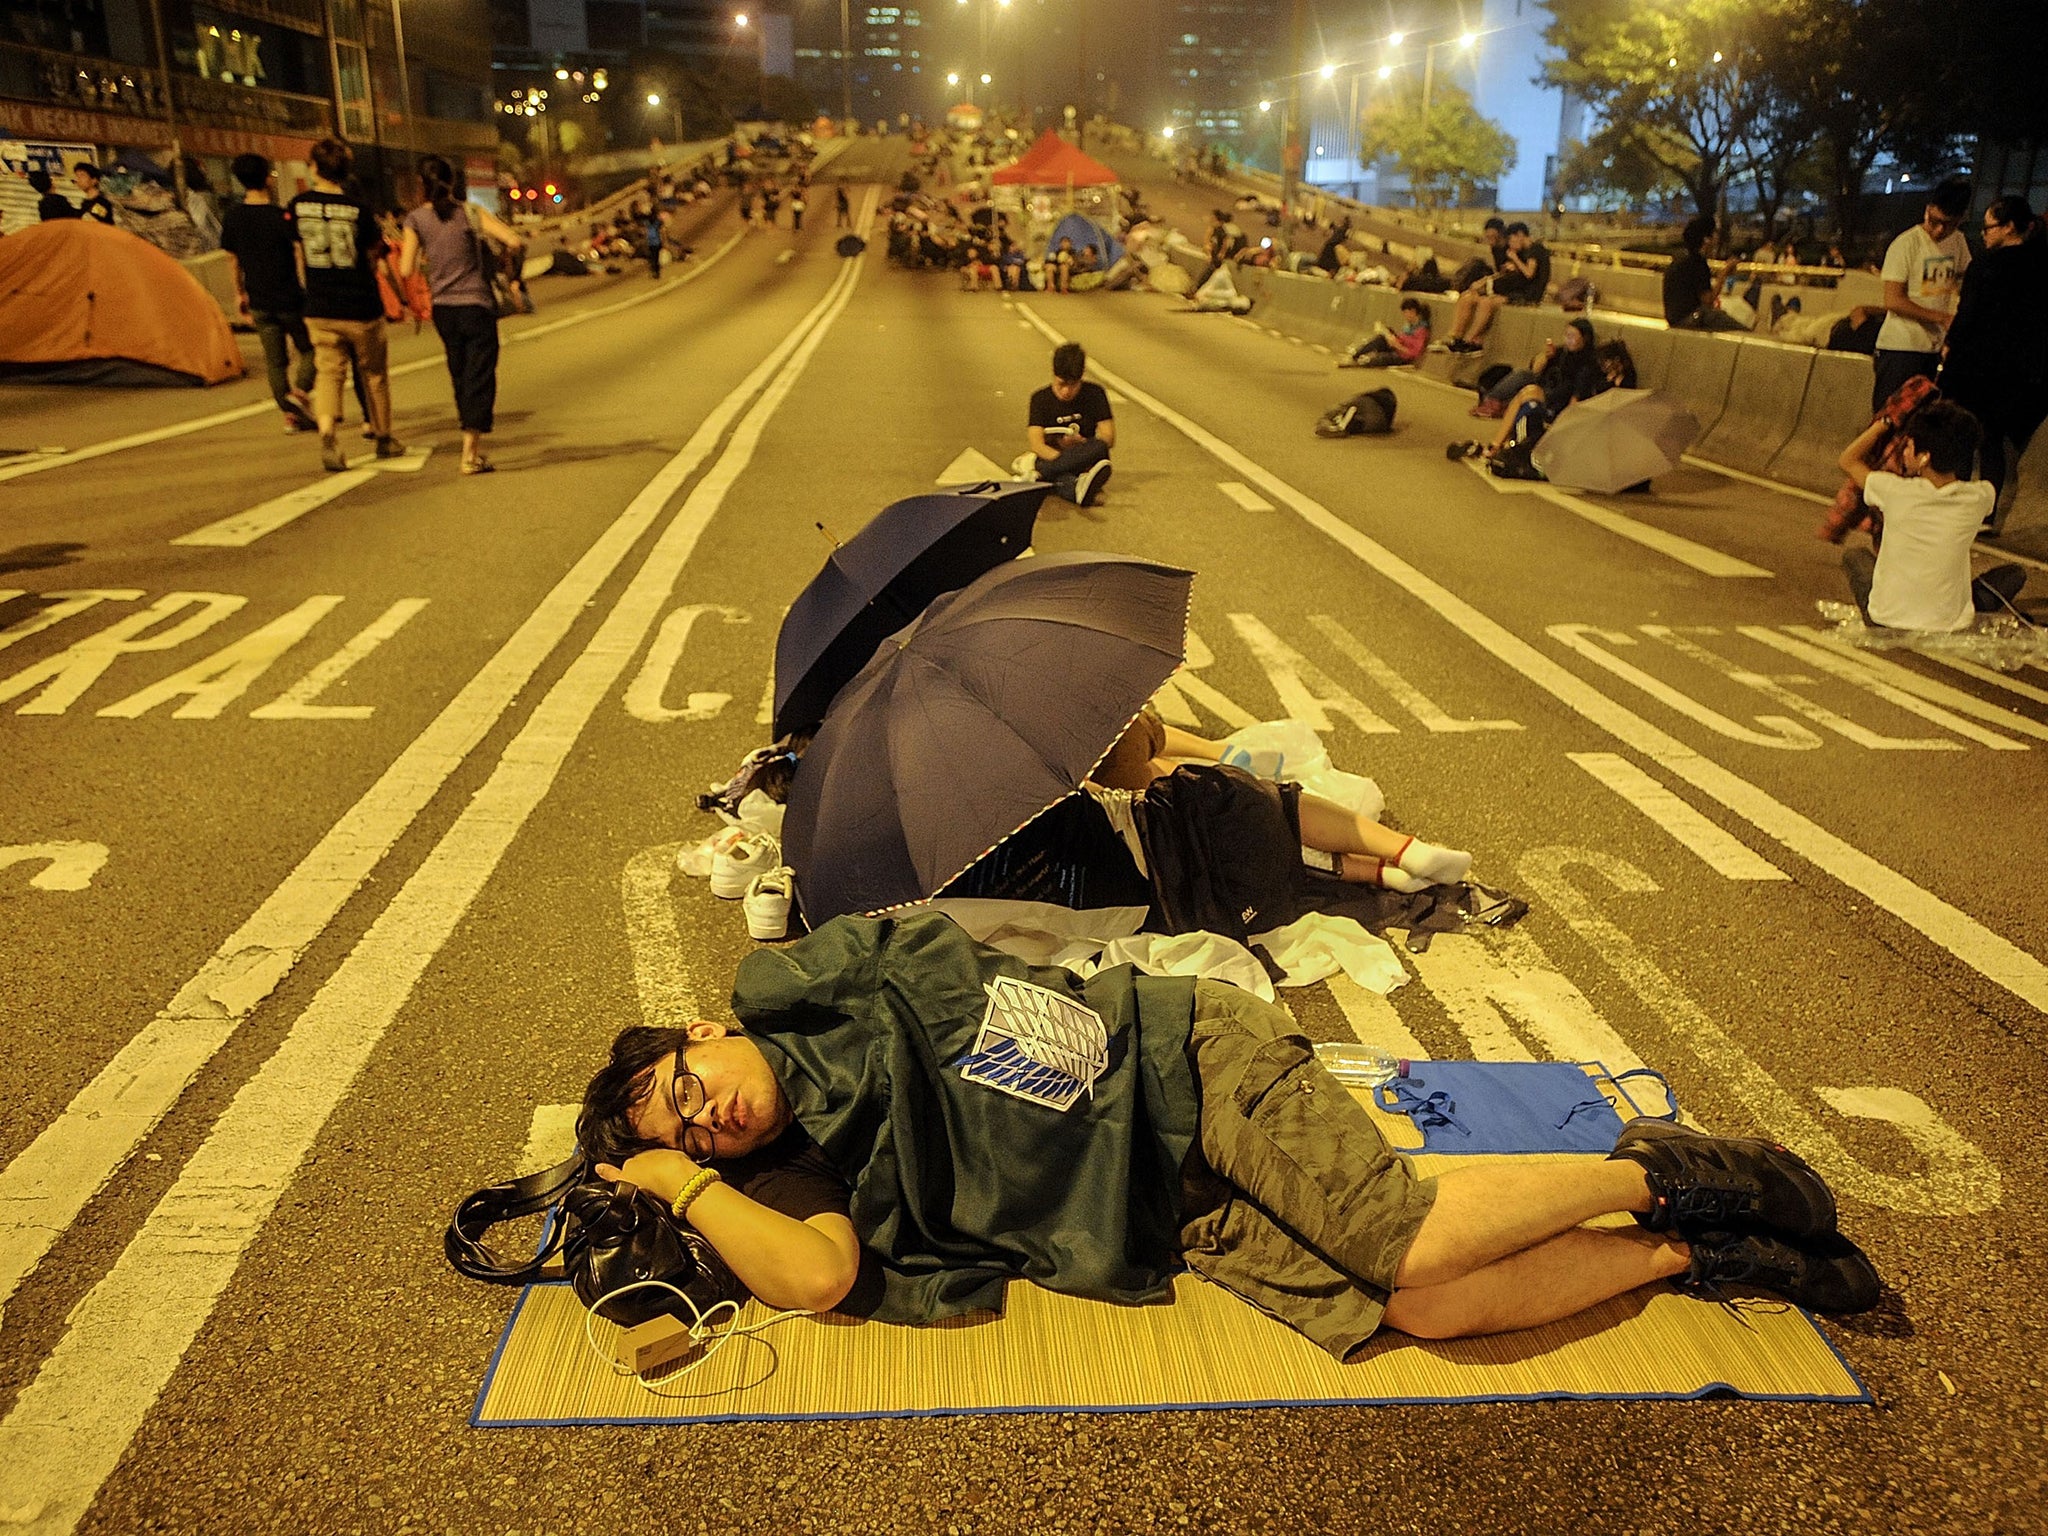 A protester sleeps in the street outside the Hong Kong
government building